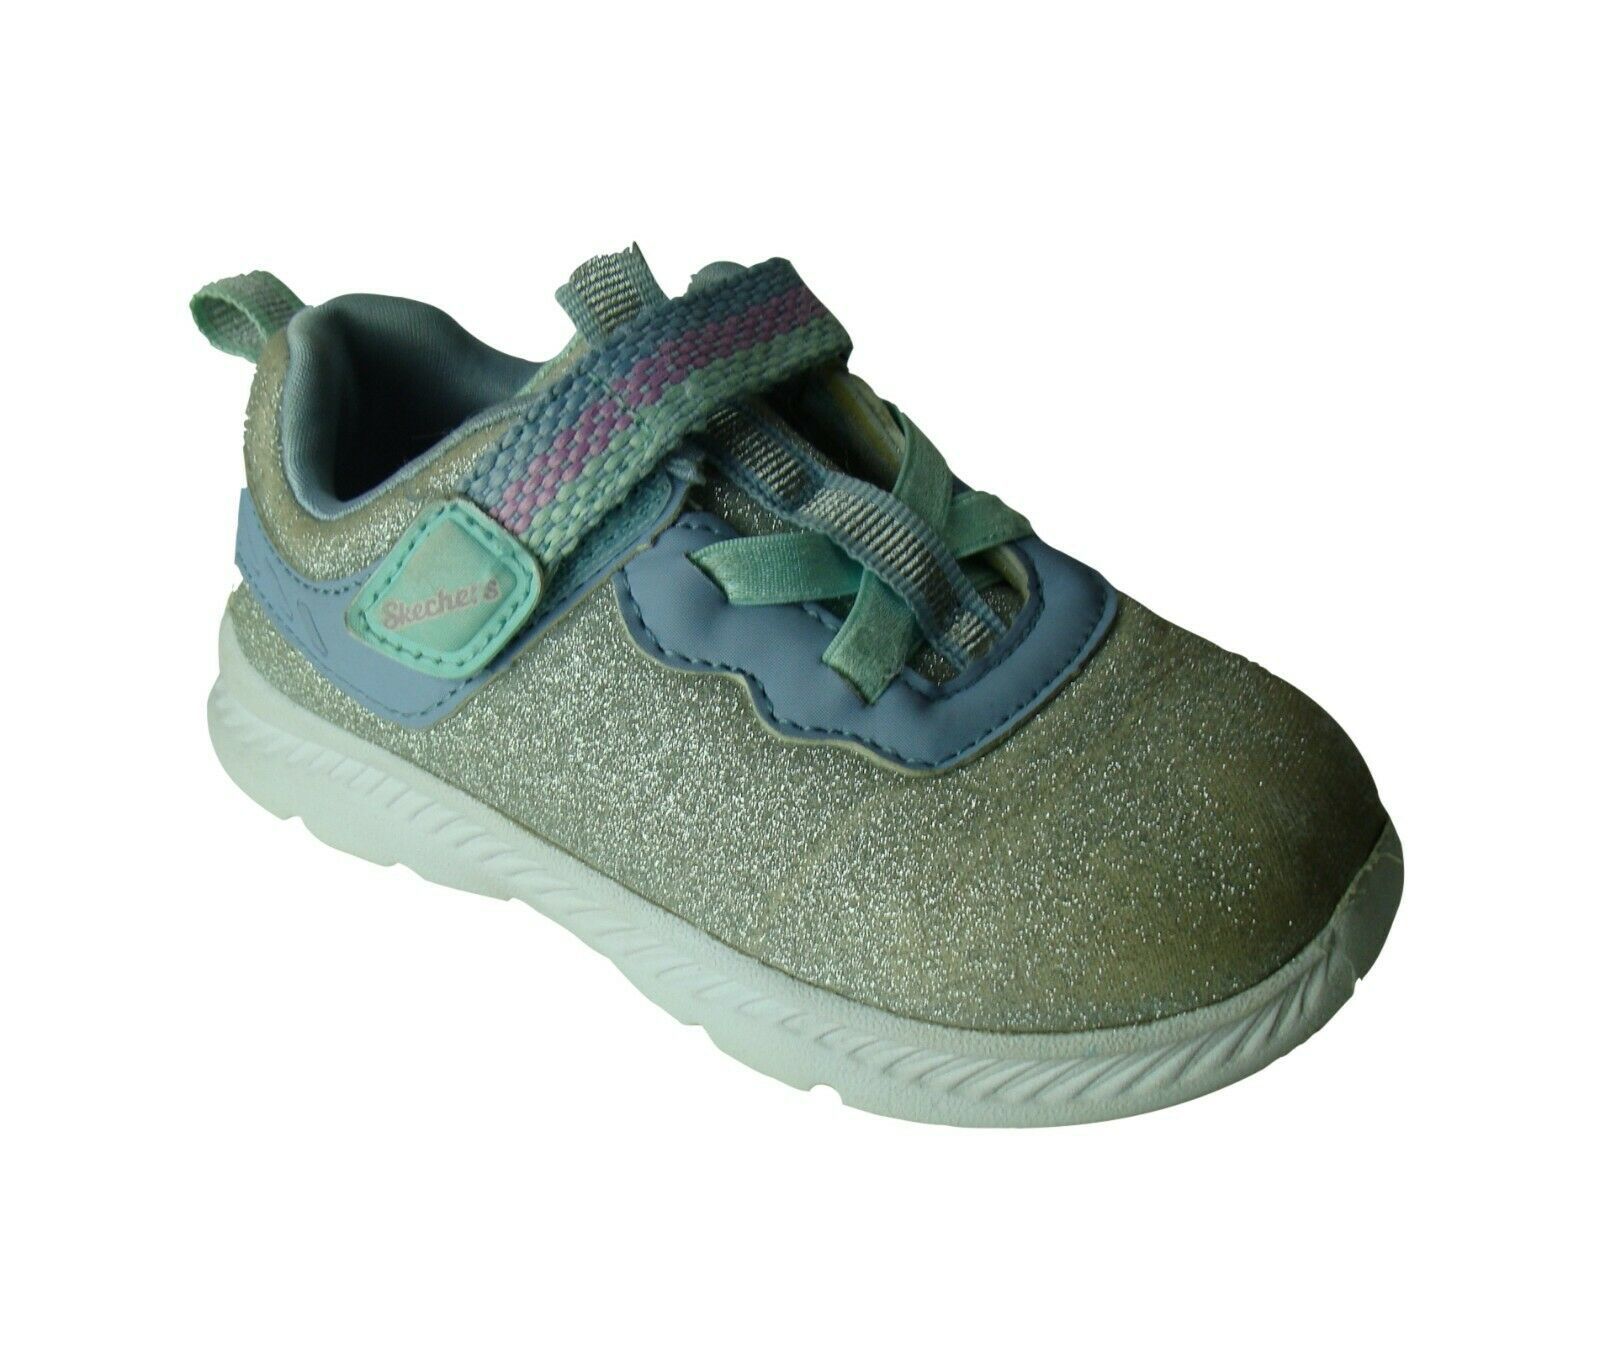 SKECHERS Kids Shoes Silver Sparkle Fabric Girls Size 7.5 - $13.49